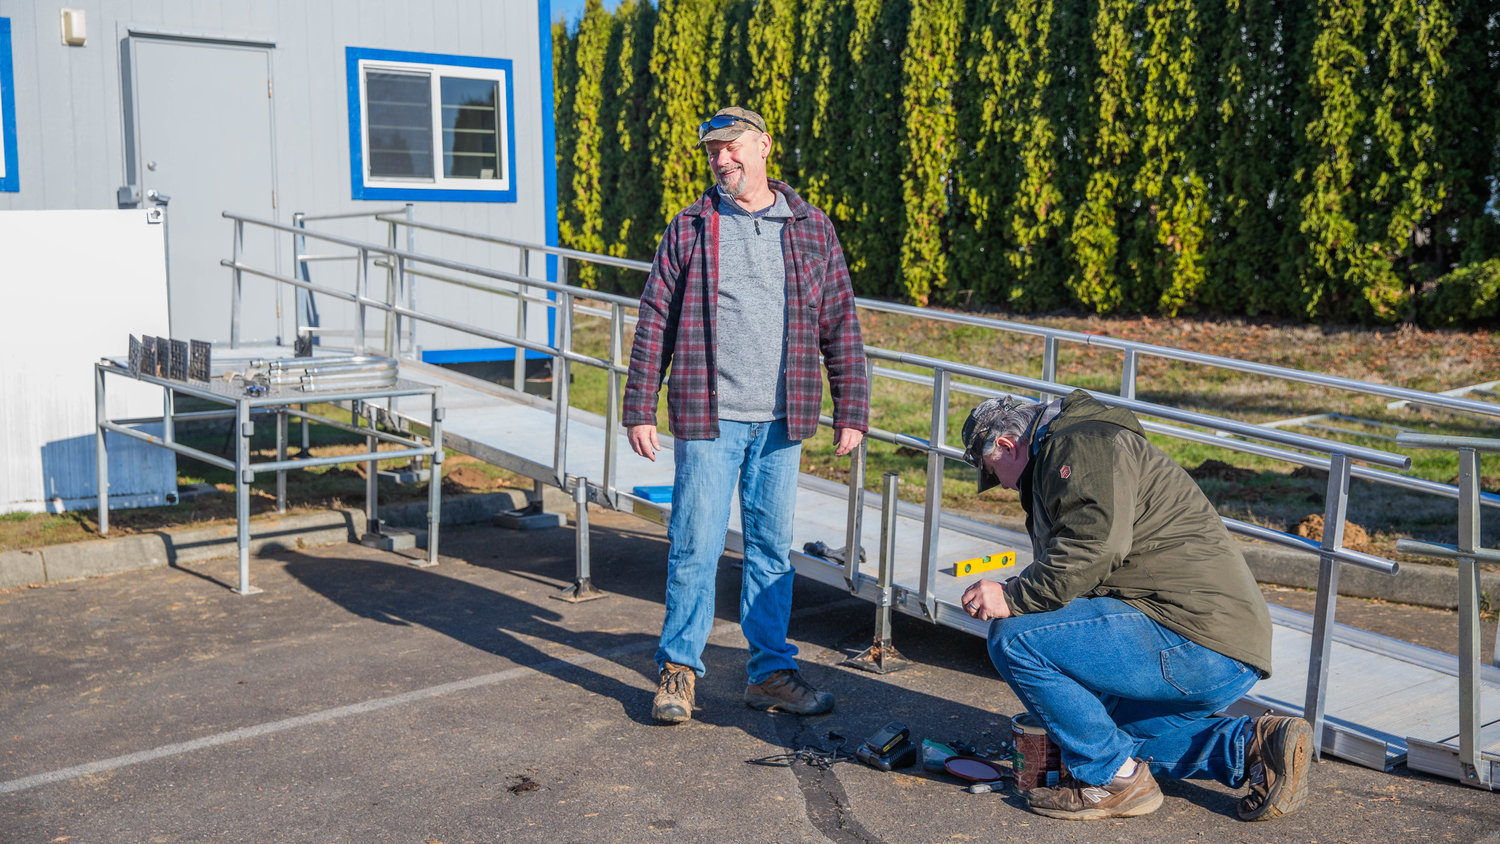 Twin Cities Rotarians Michael Ervin and Greg Mitchell work on an aluminum ramp Saturday afternoon for a portable building outside the Veterans Memorial Museum in Chehalis.